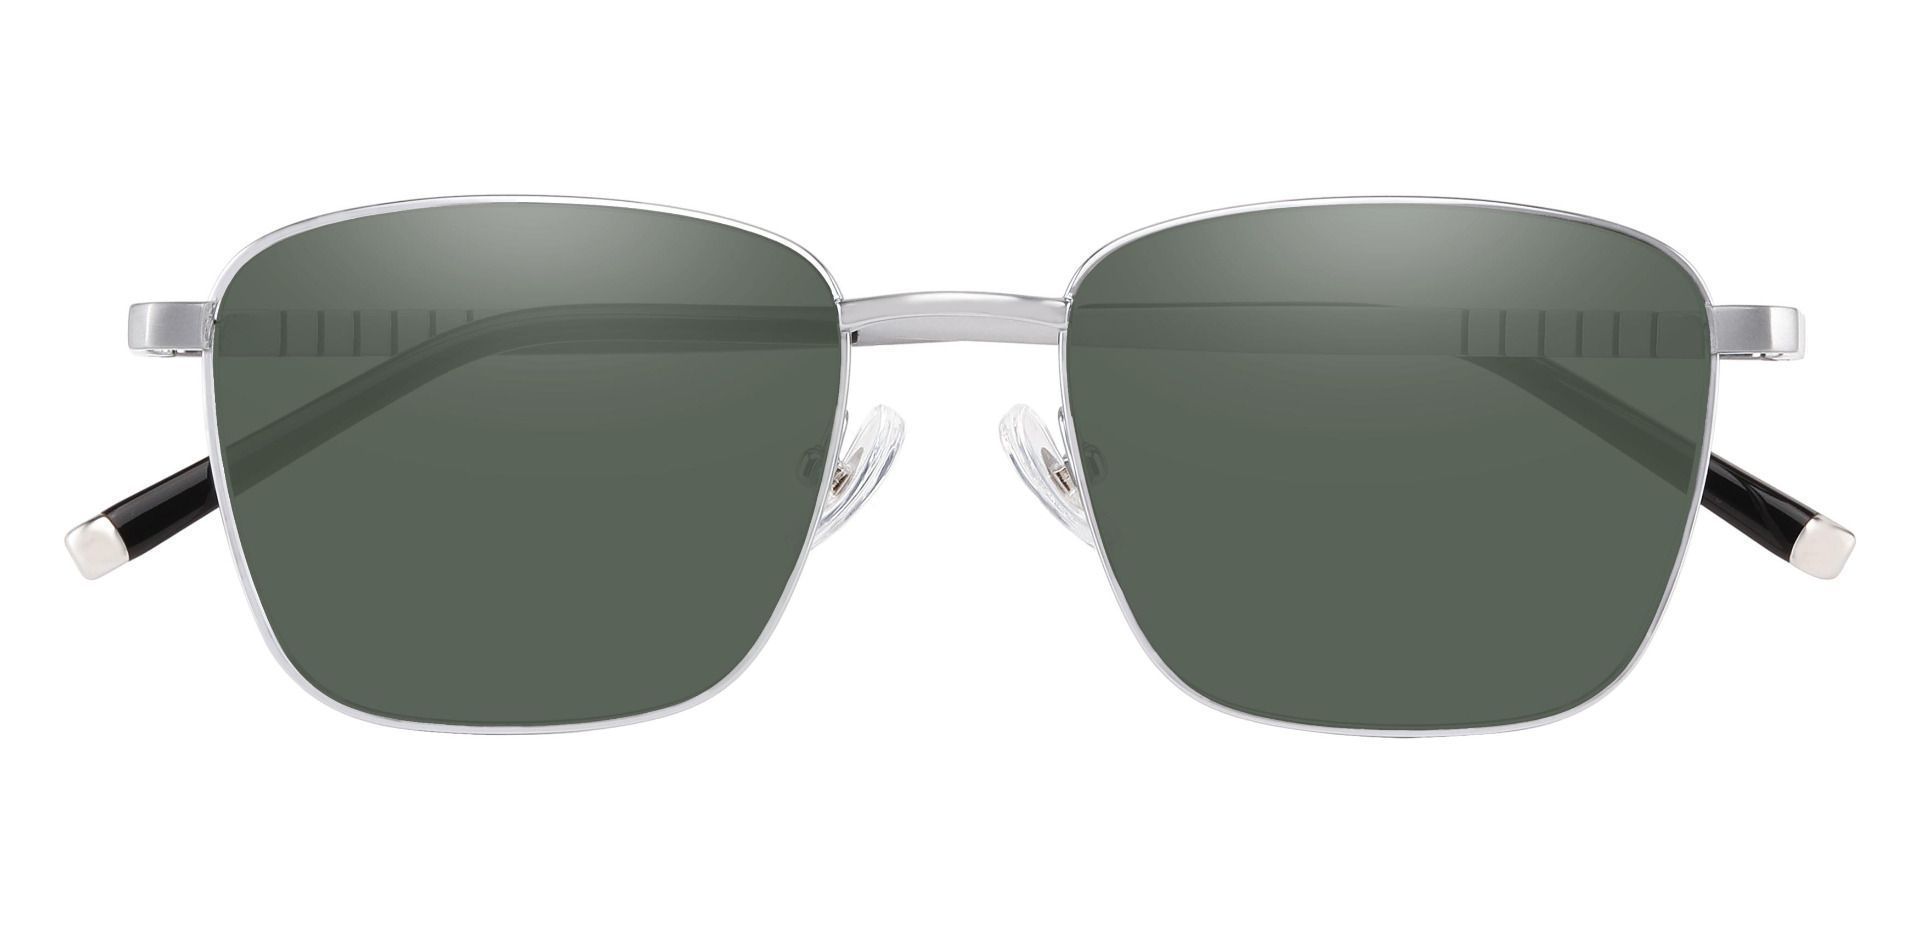 May Square Reading Sunglasses - Silver Frame With Green Lenses